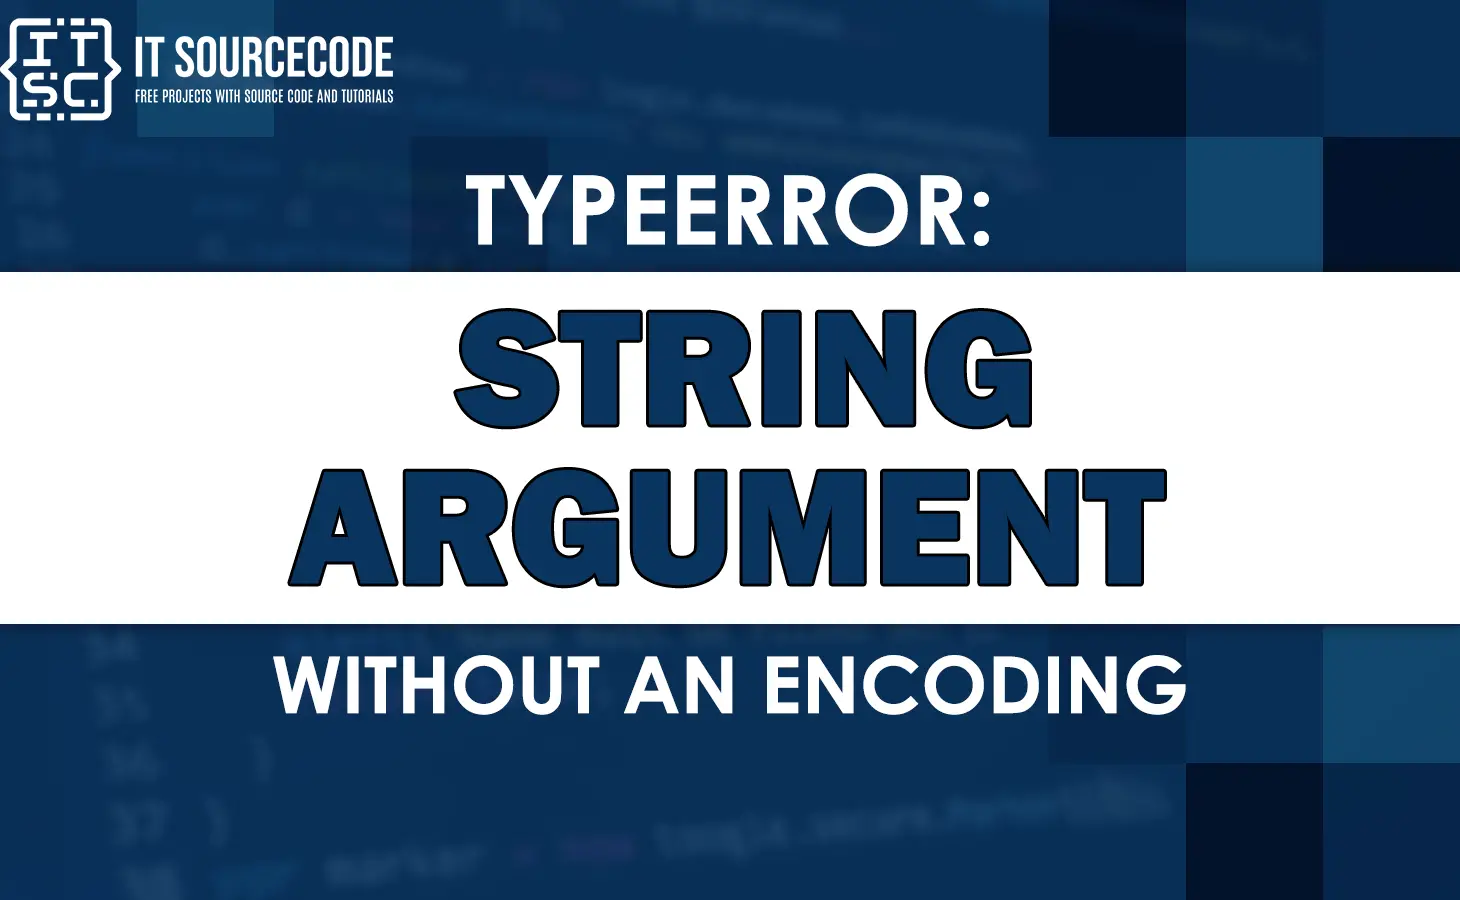 Typeerror string argument without an encoding